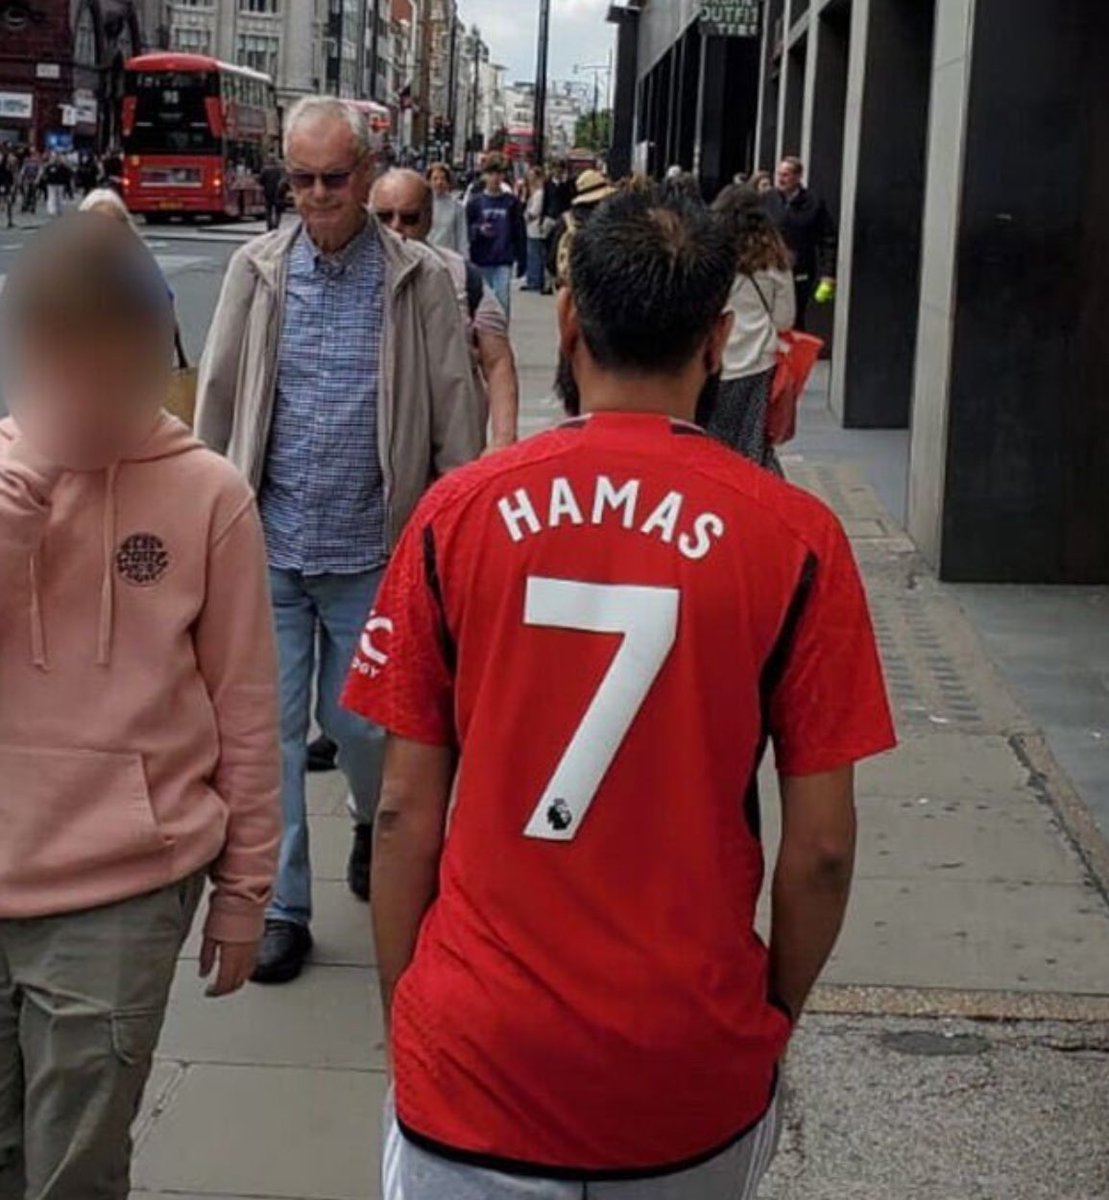 Man walks down London’s Oxford street wearing a ‘Hamas 7’ t-shirt- referencing the October 7th attack.